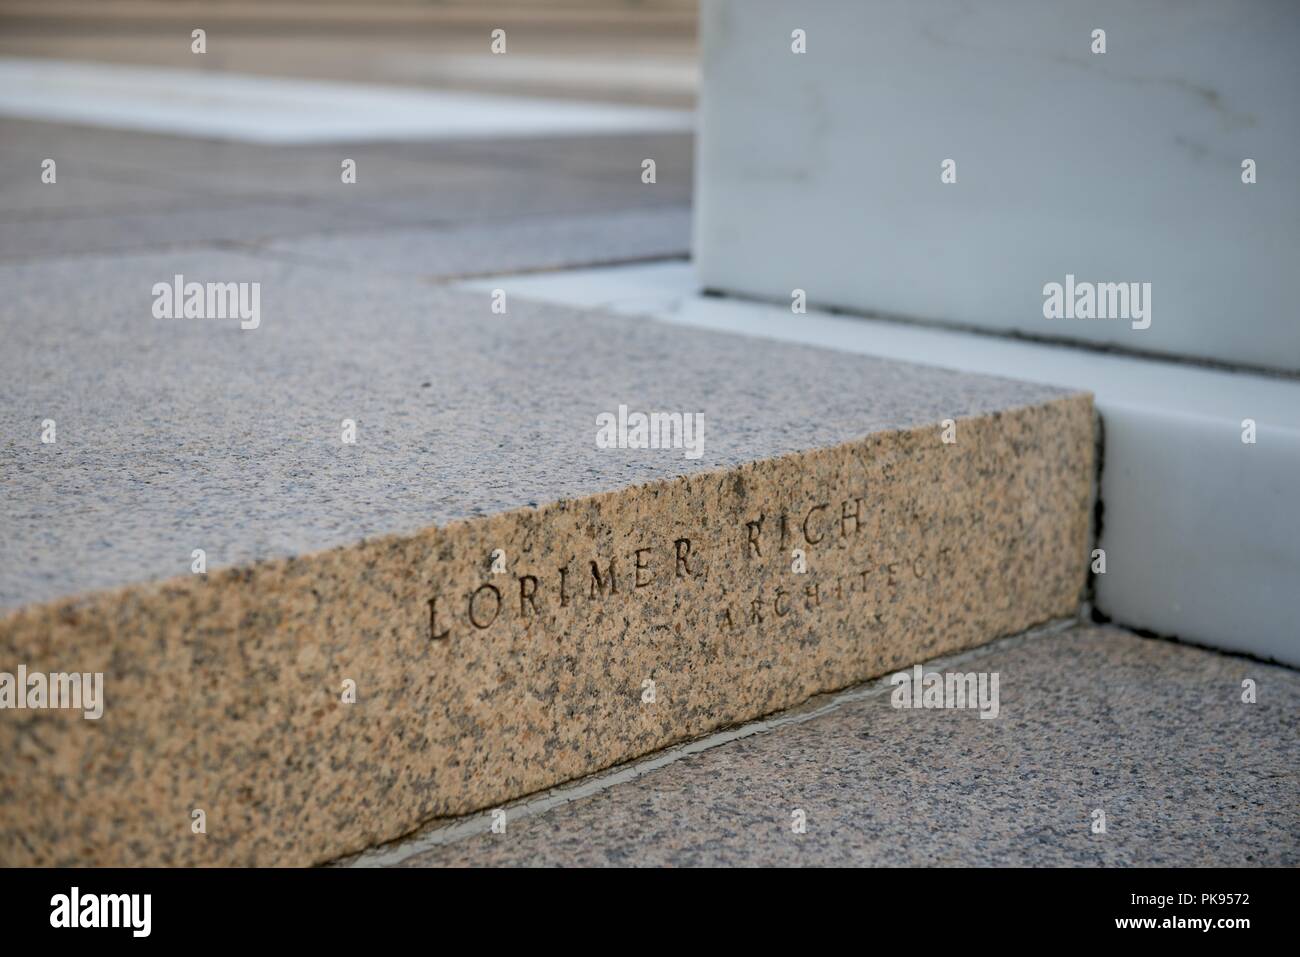 Close up of an engraving on the steps of the Tomb of the Unknown Soldier at Arlington National Cemetery, Arlington, Virginia, August 7, 2018, August 7, 2018. Architect Lorimer Rich and sculptor Thomas Hudson Jones designed the Tomb of the Unknown Soldier. (U.S. Army photo by Elizabeth Fraser / Arlington National Cemetery / released). () Stock Photo